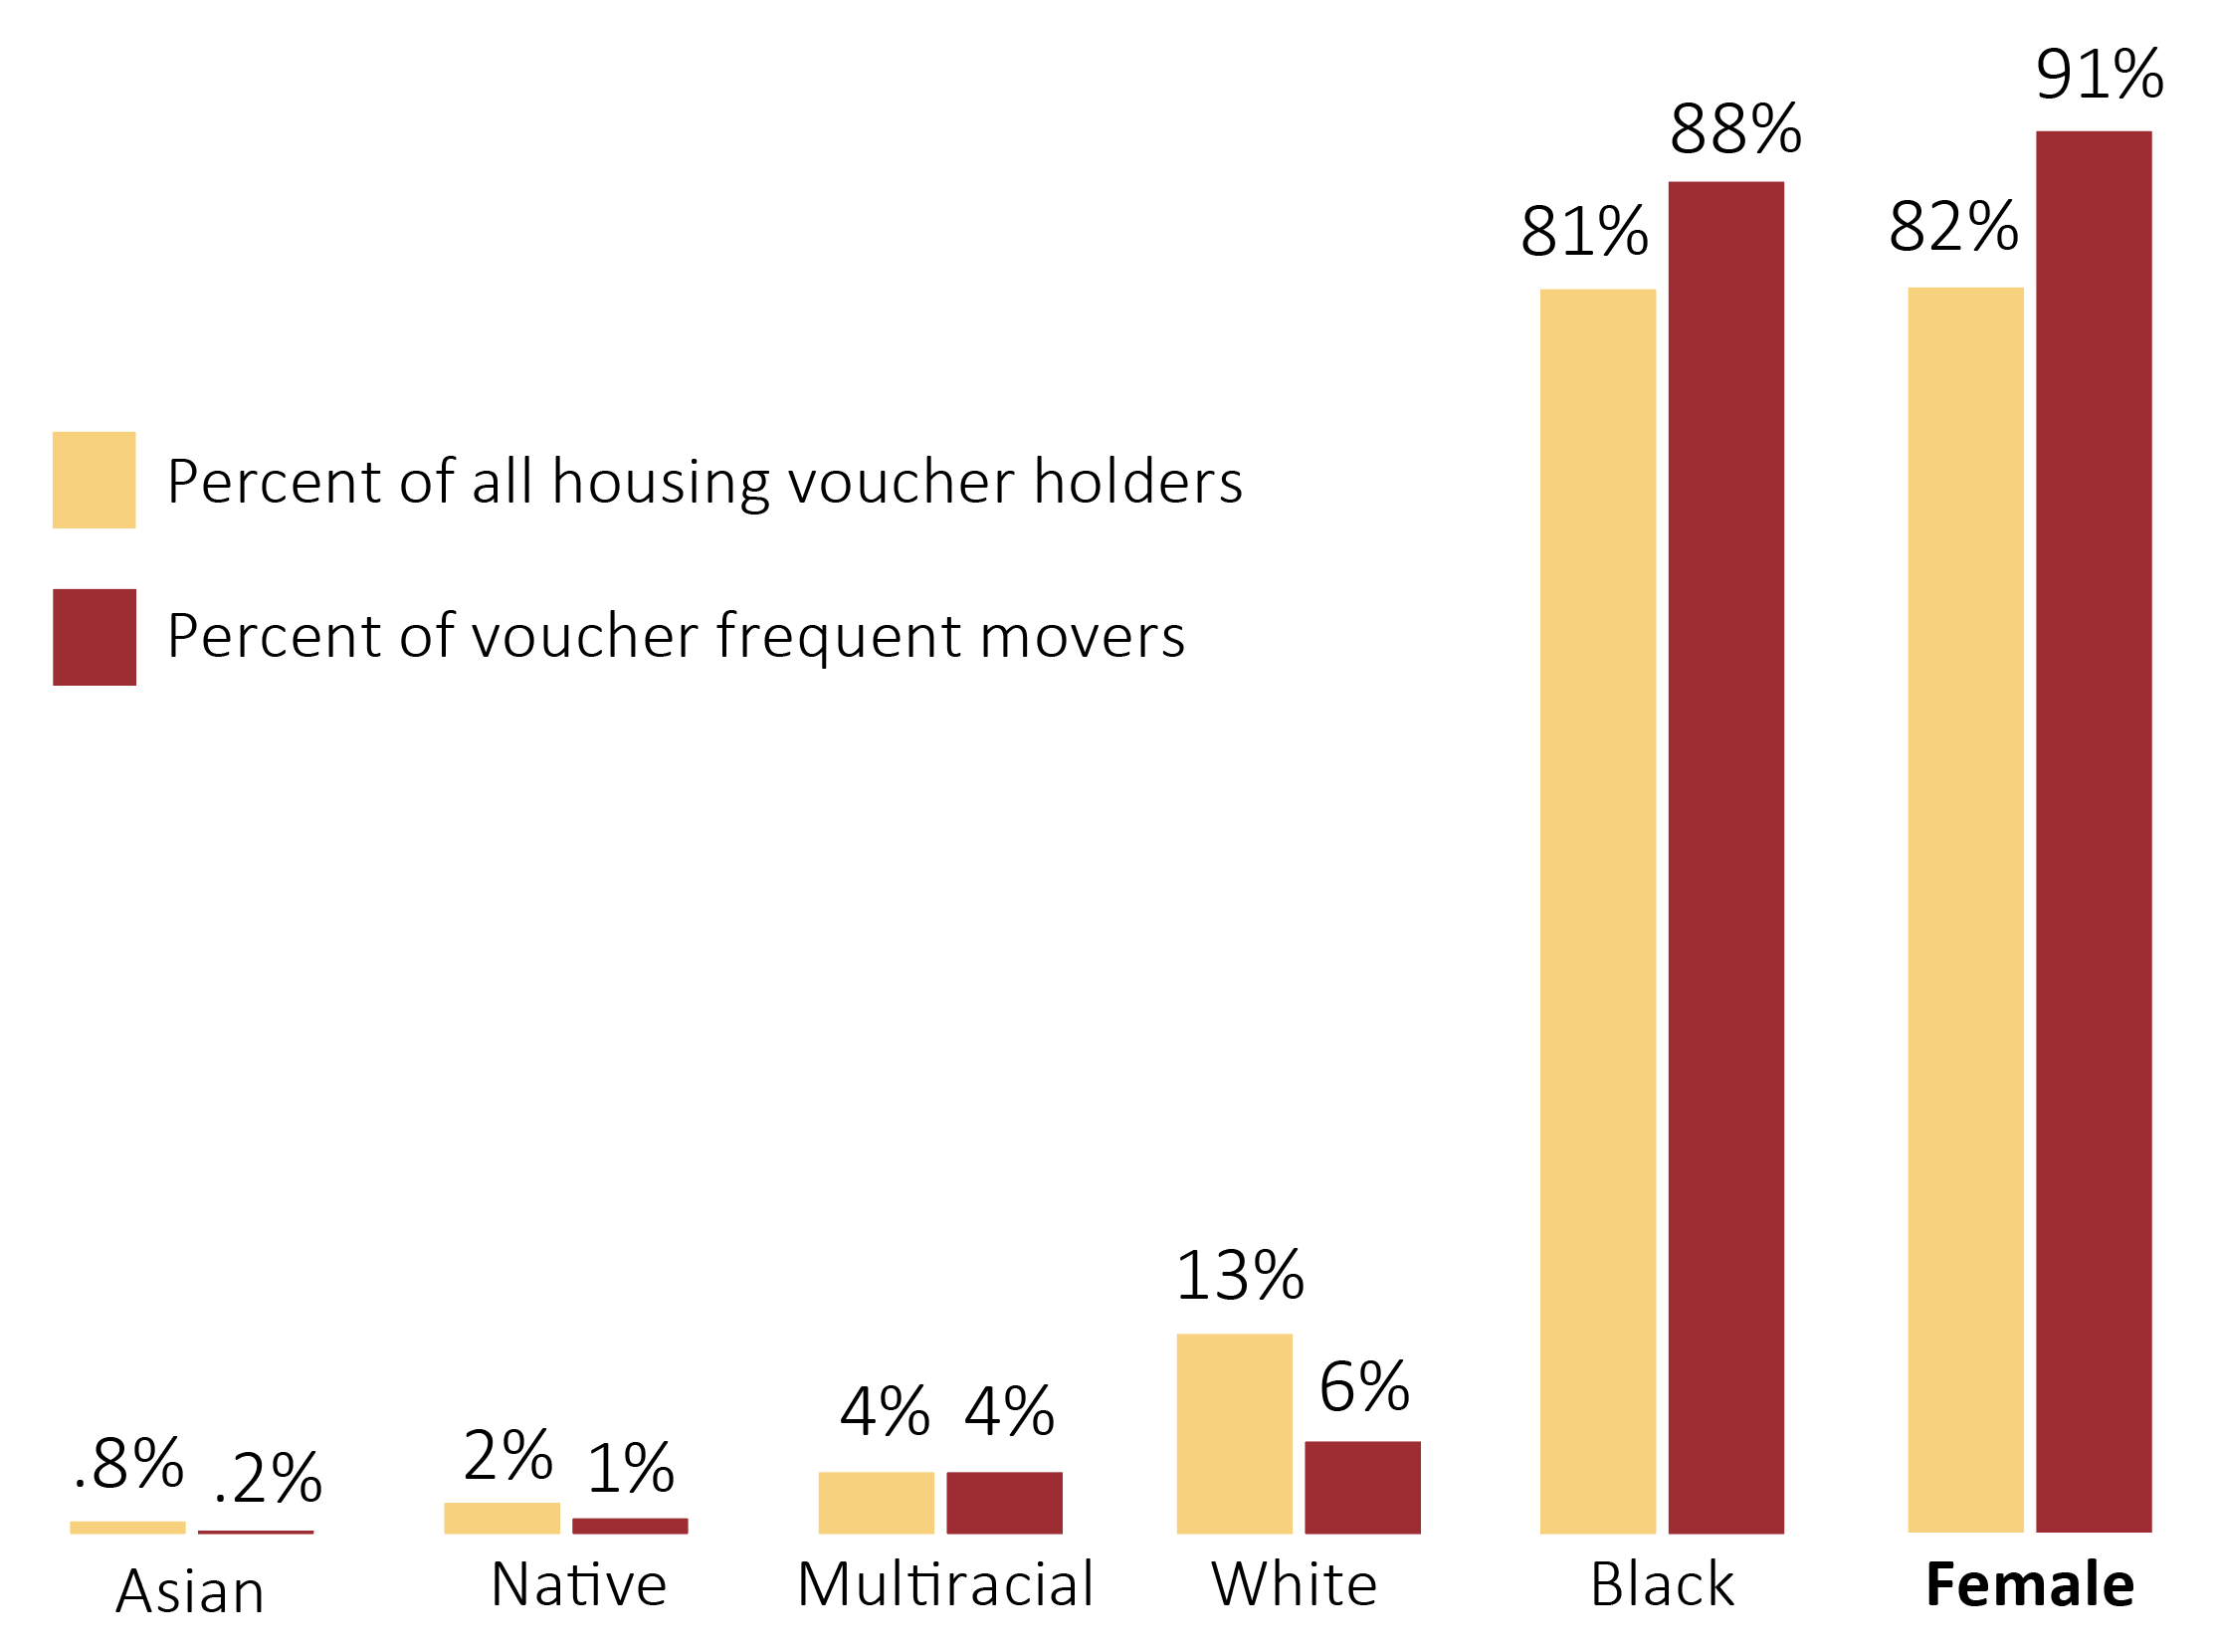 Percent of all housing voucher holders, Percent of voucher frequent movers